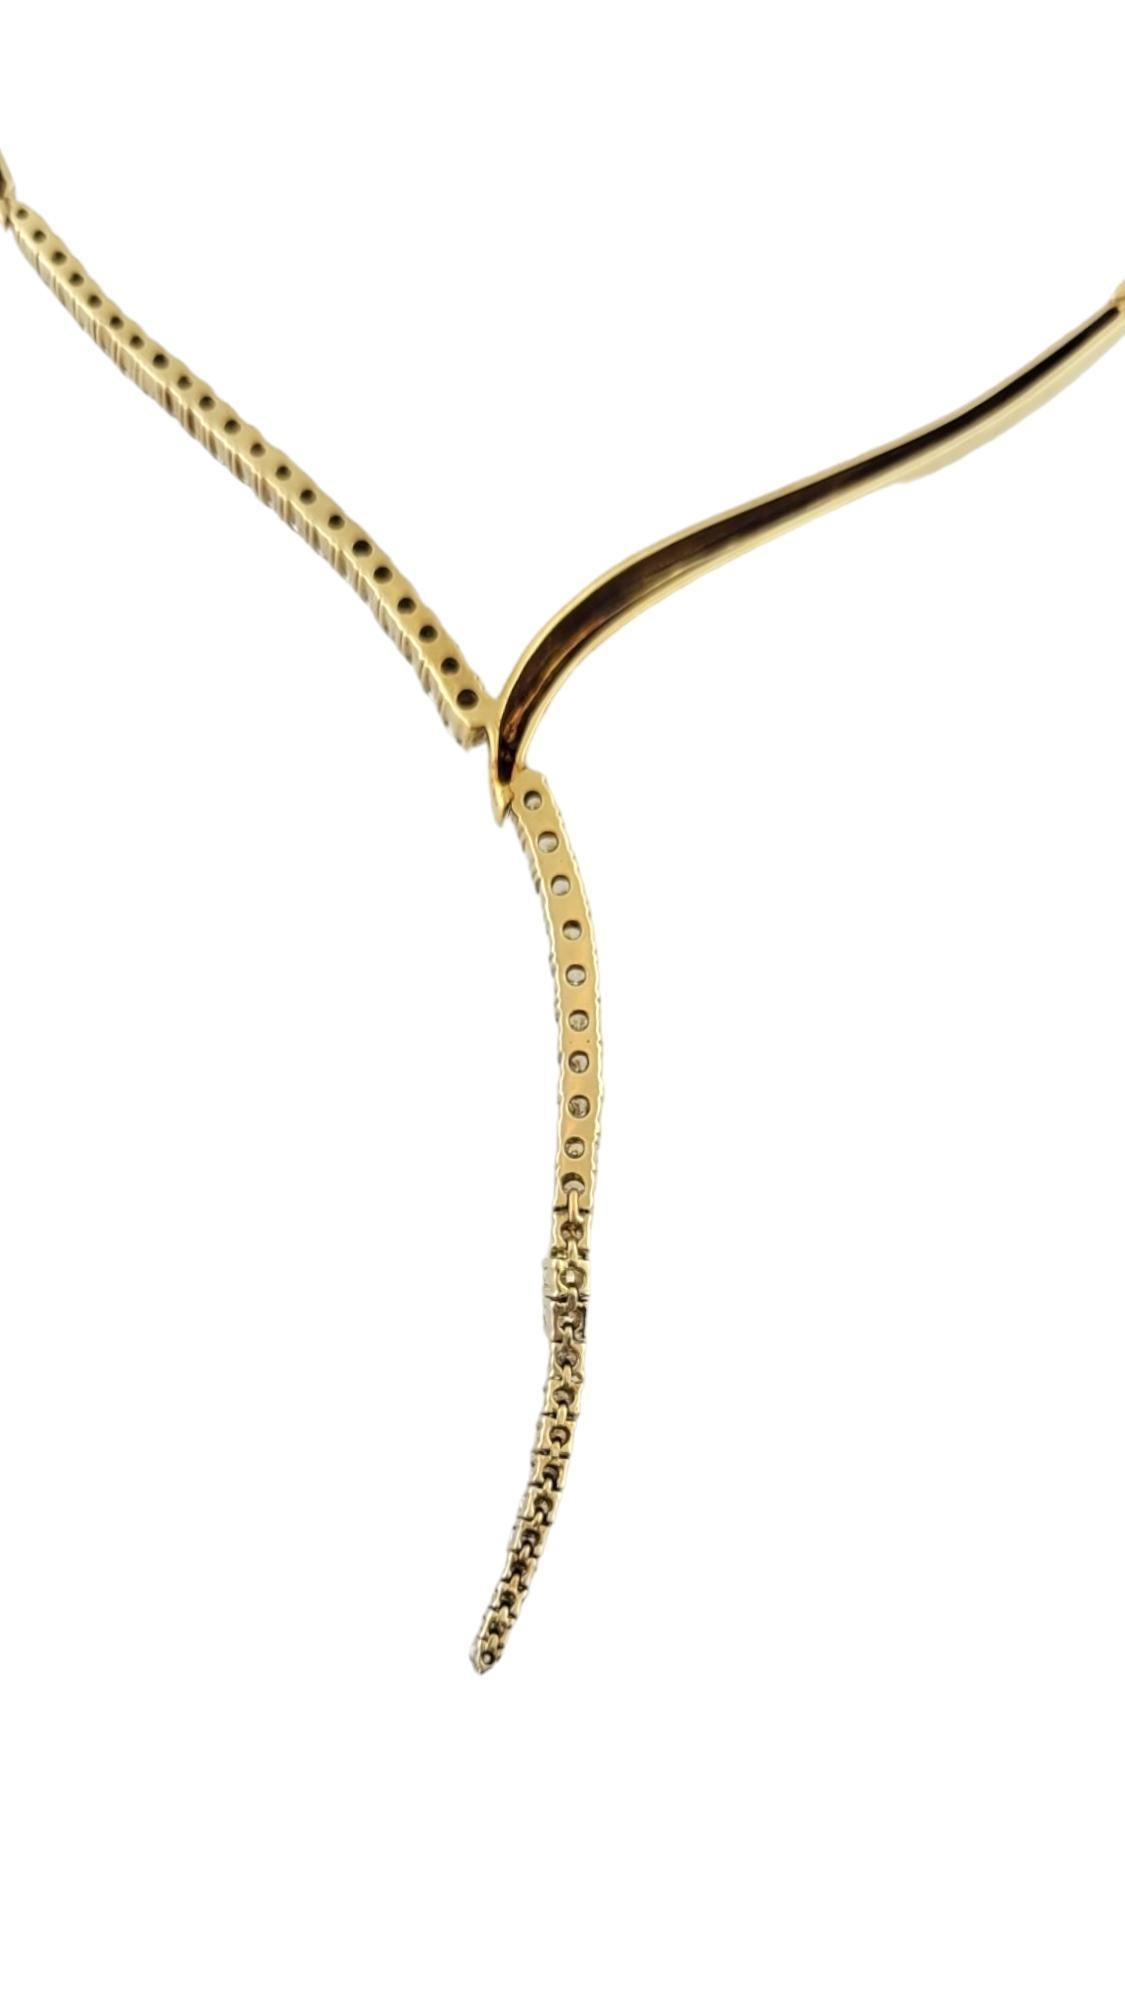 Brilliant Cut Jose Hess 14 Karat Yellow Gold and Diamond Y Necklace #16969 For Sale